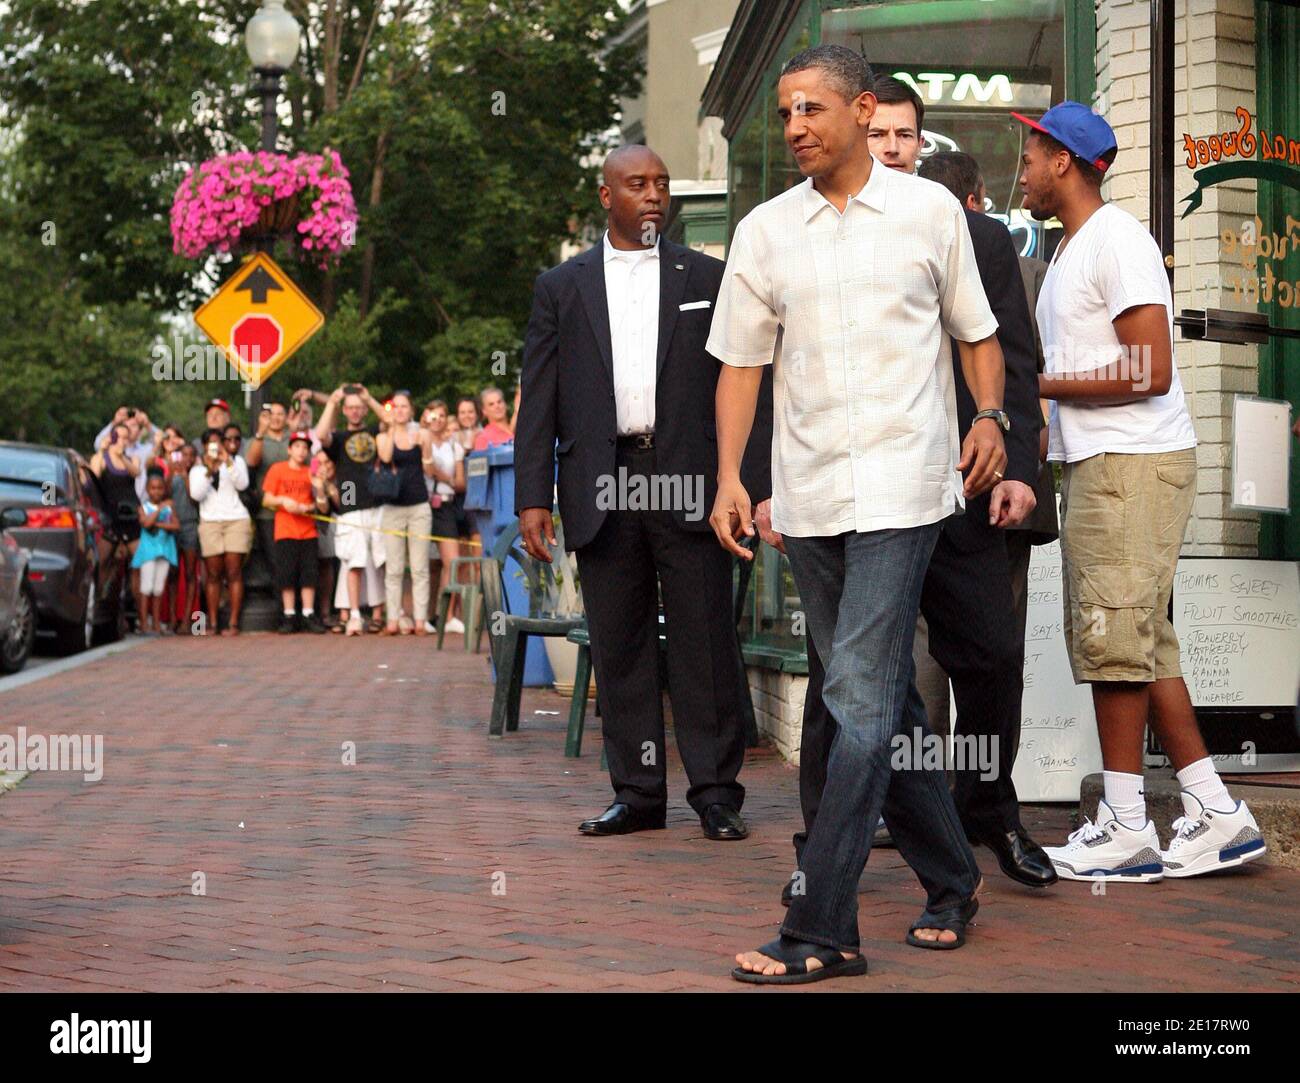 Barack Obama Jeans High Resolution Stock Photography and Images - Alamy